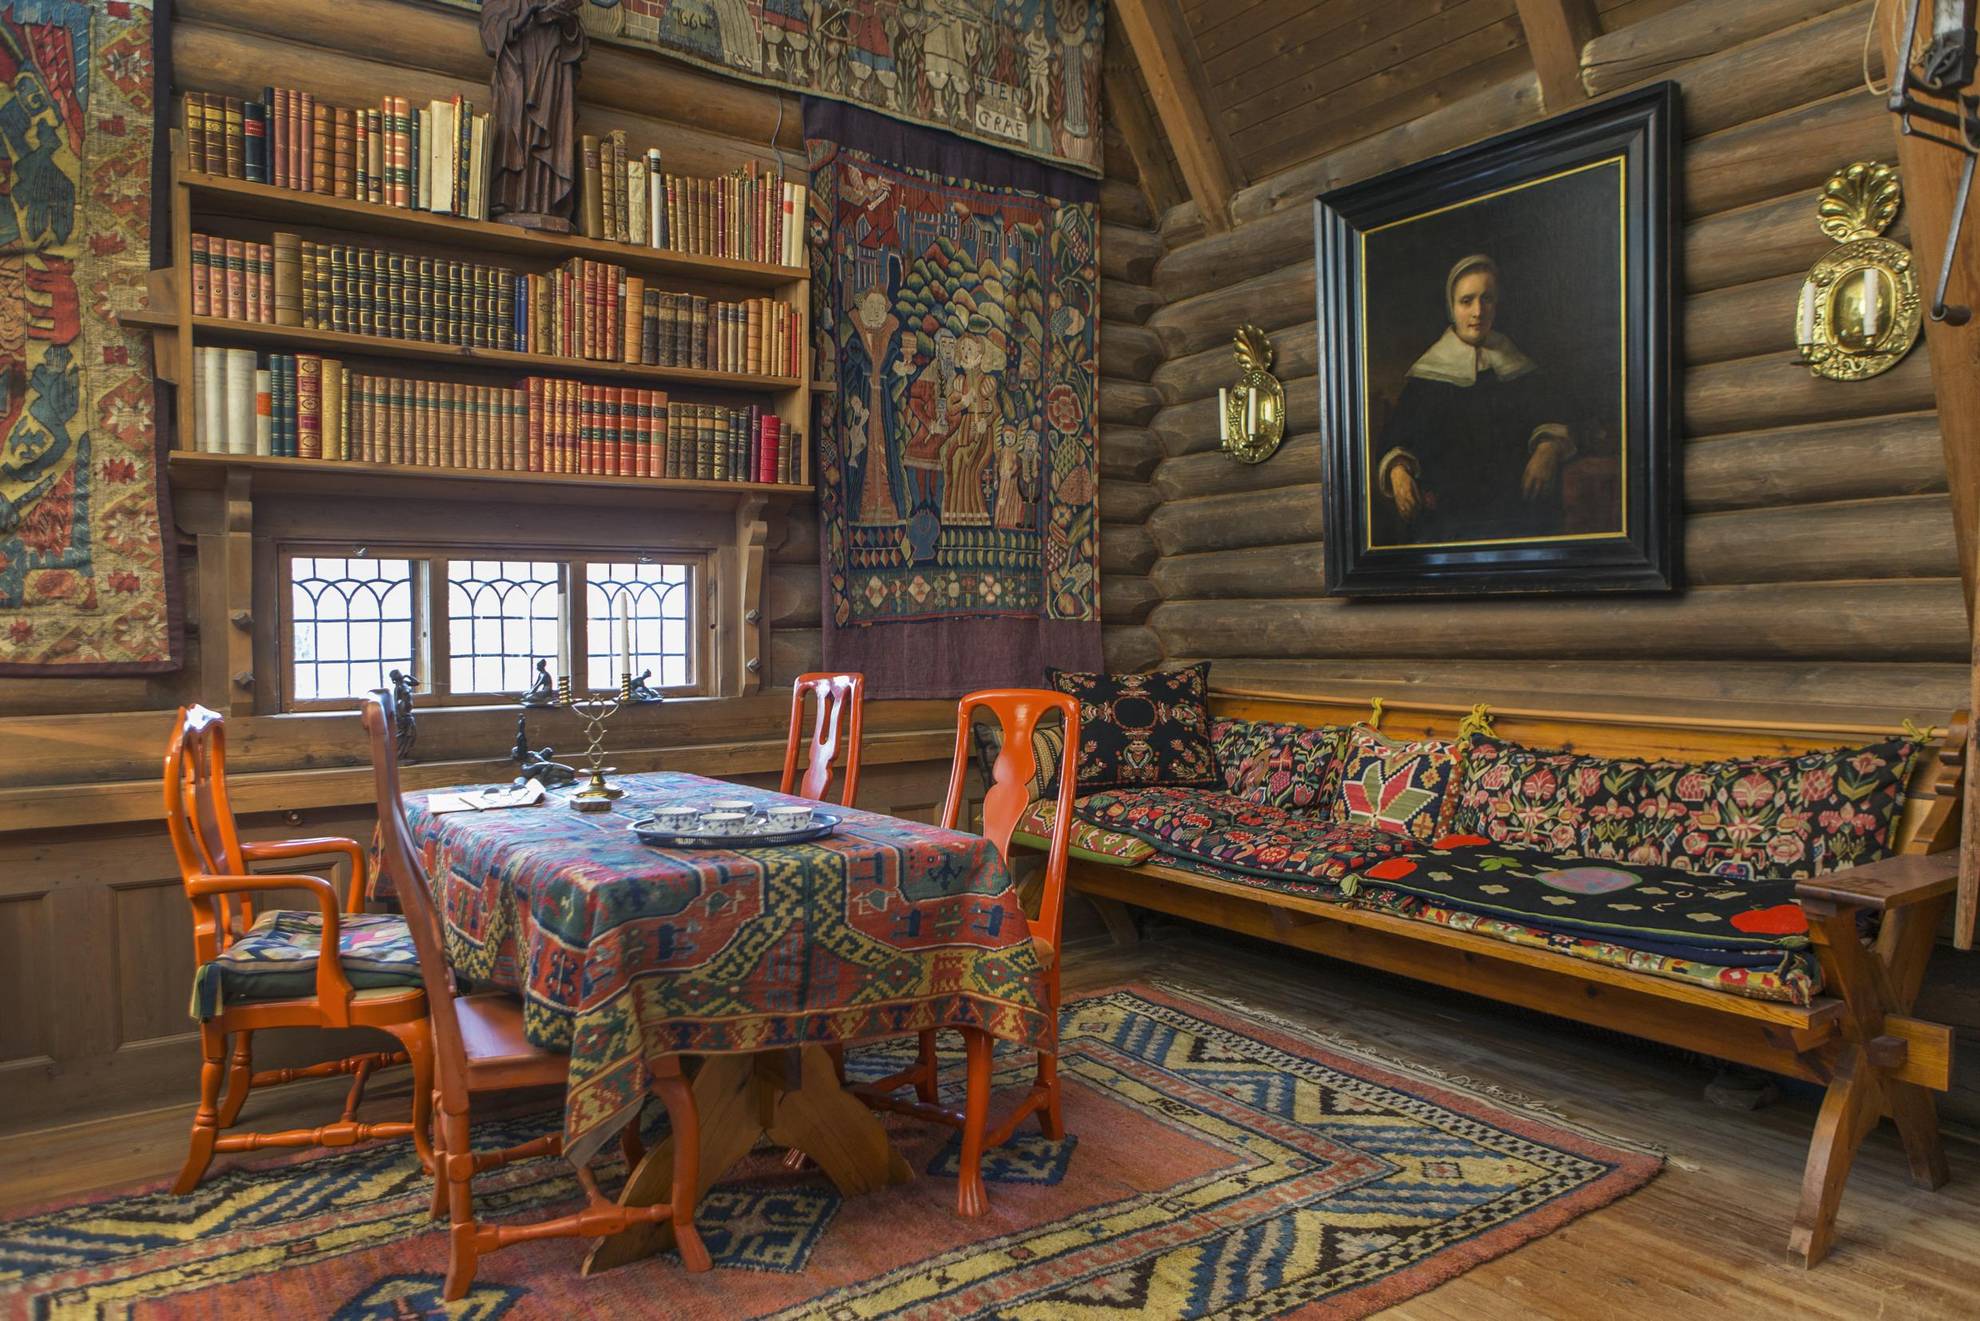 The colourful dining hall of Anders Zorn, with woven tapestries, bright red chairs around a table with a woven cloth, a bookshelf and a wooden couch.